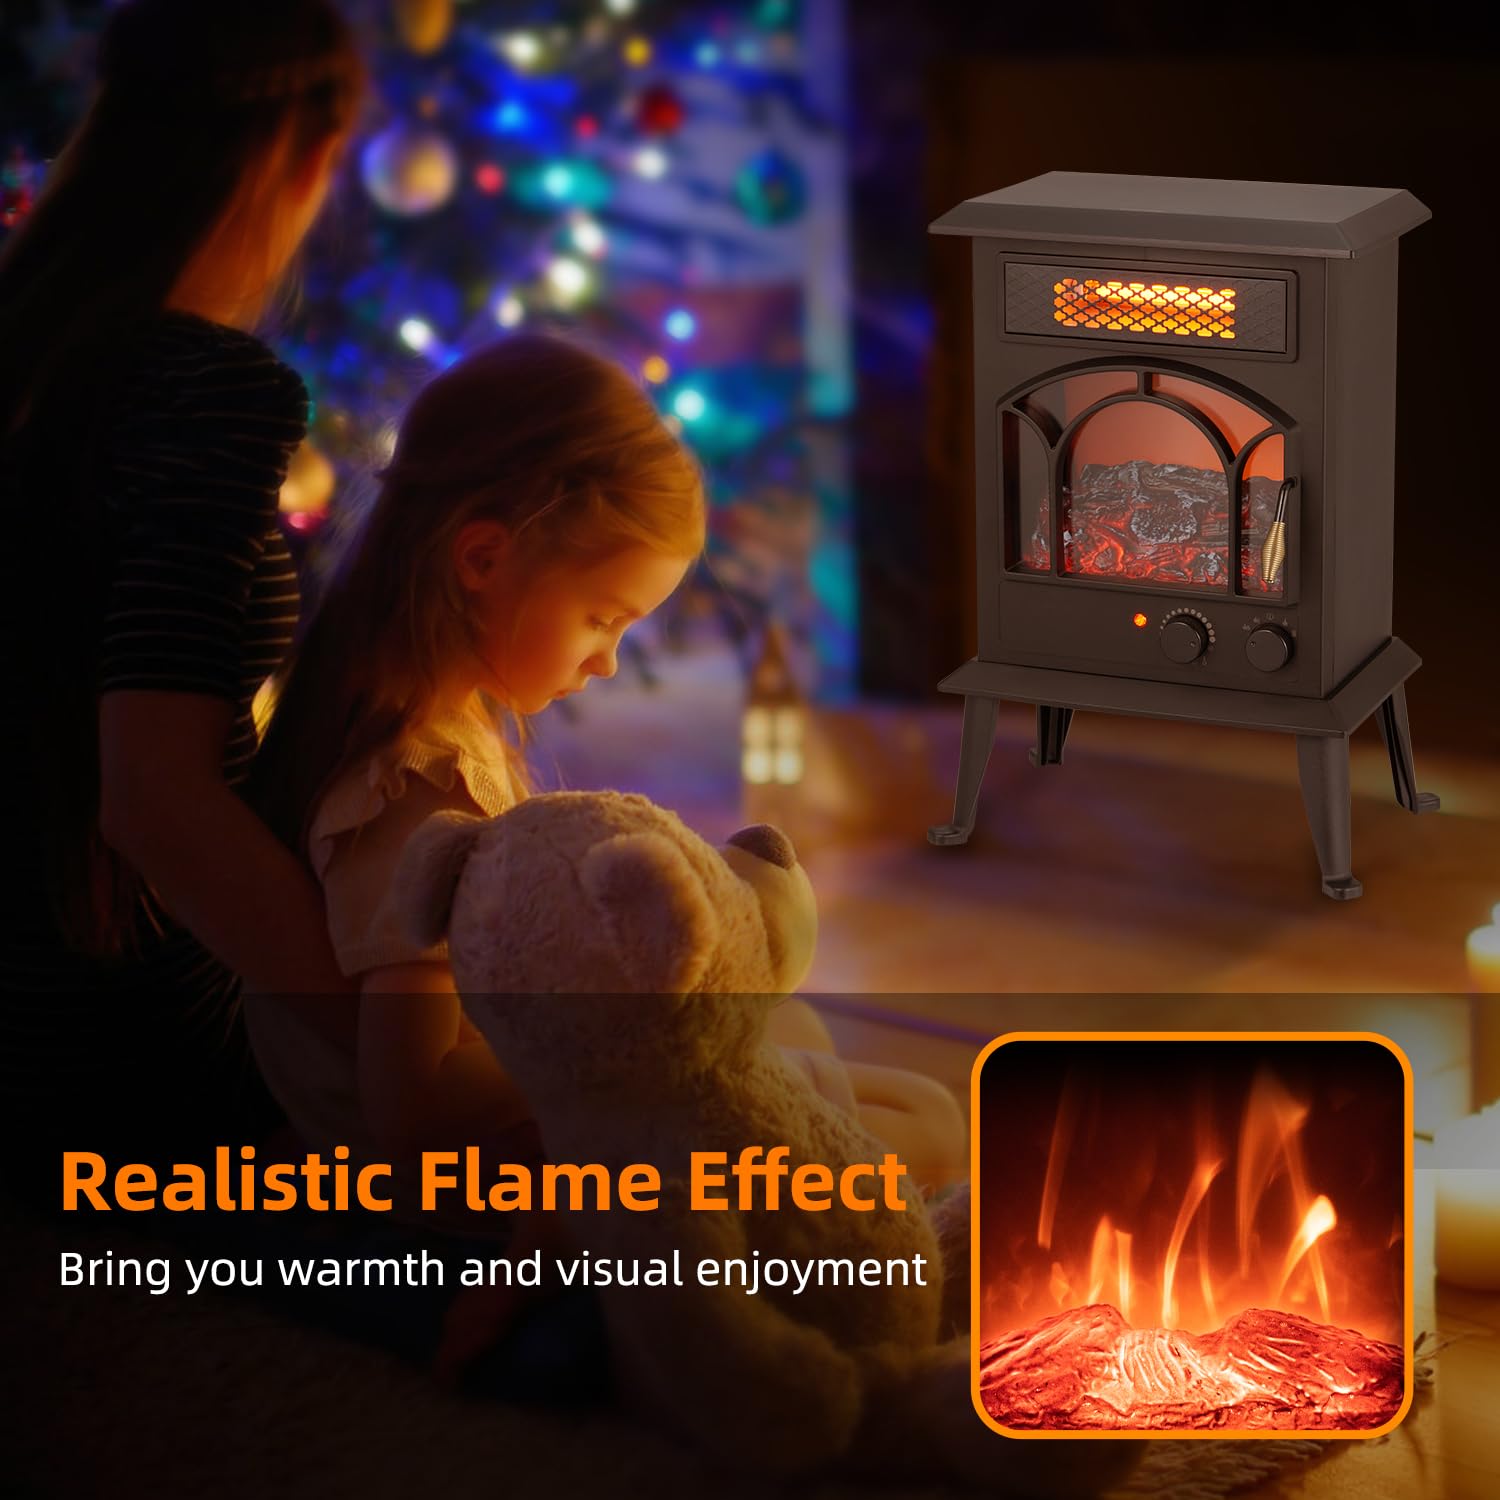 WEWARM Electric Fireplace Heater, 22.4" Freestanding Infrared Fireplace Heater for Indoor Use with Realistic Flame Effect, Overheating Safety Protection Stove Space Heater 1500W